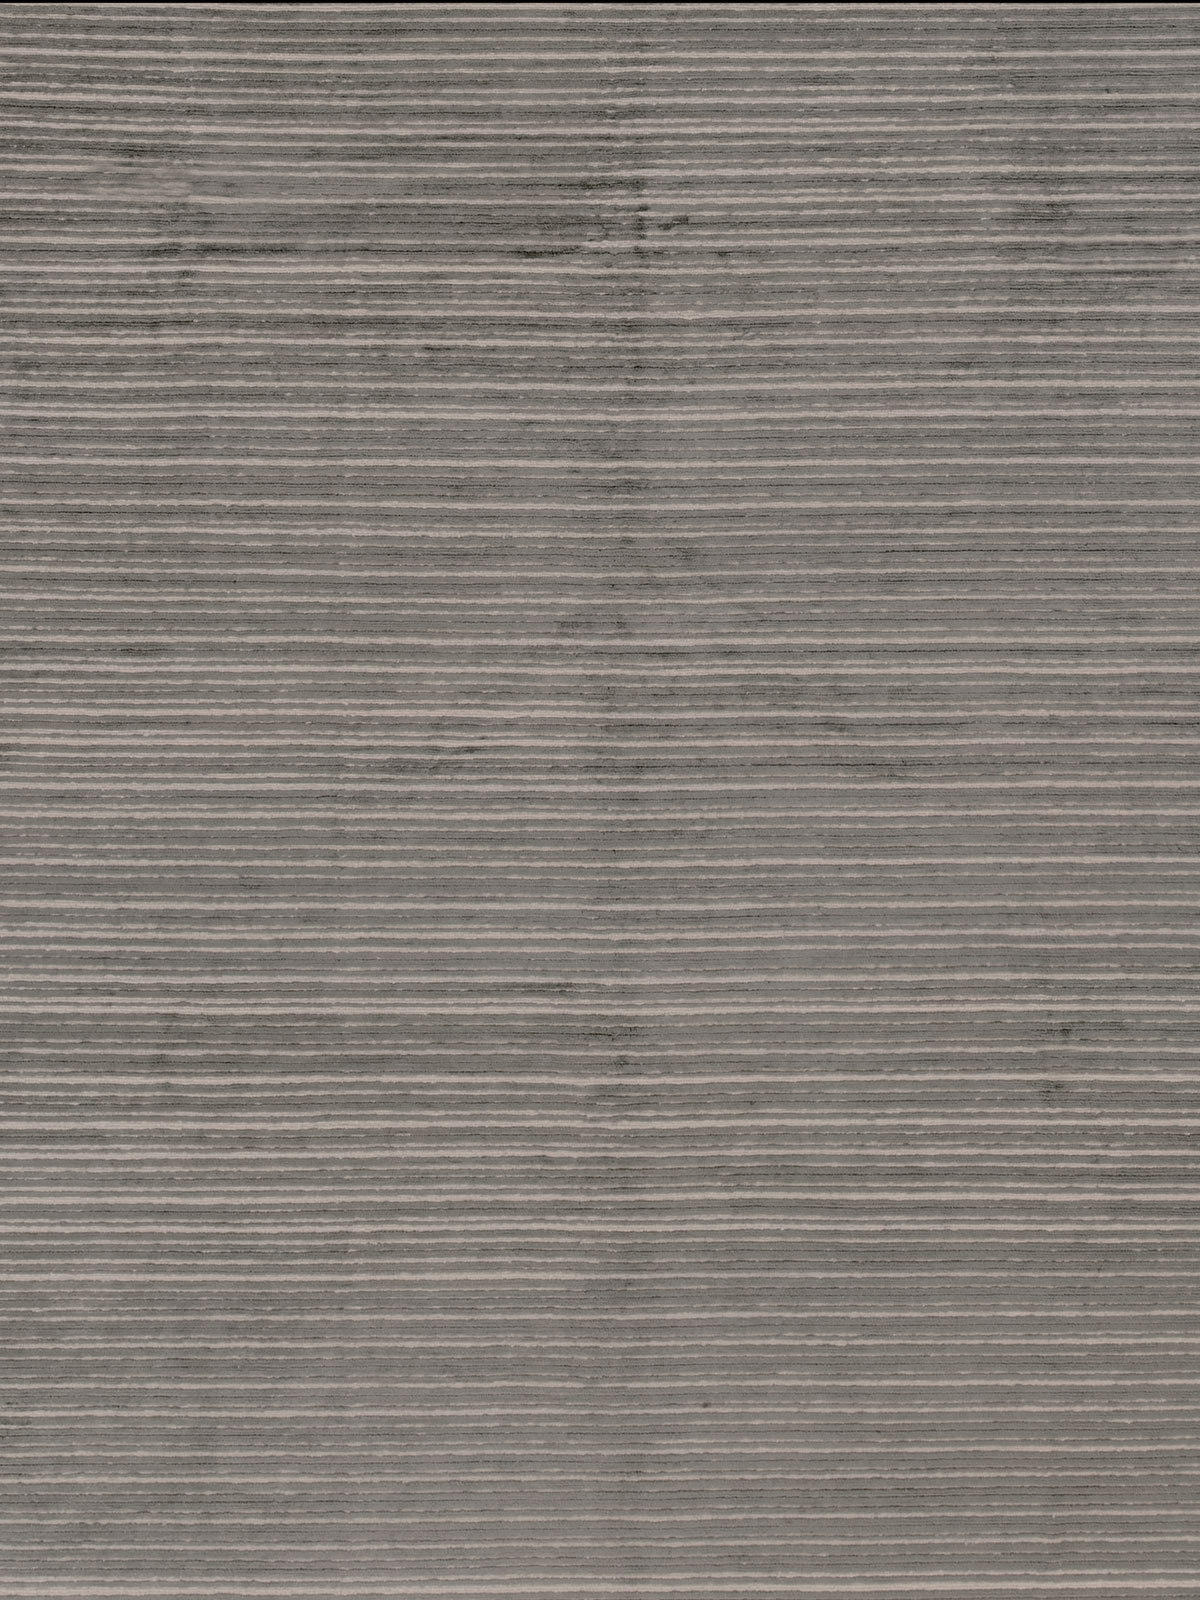 Eccelso Beige Grey Handknotted Rug ☞ Size: 300 x 300 cm